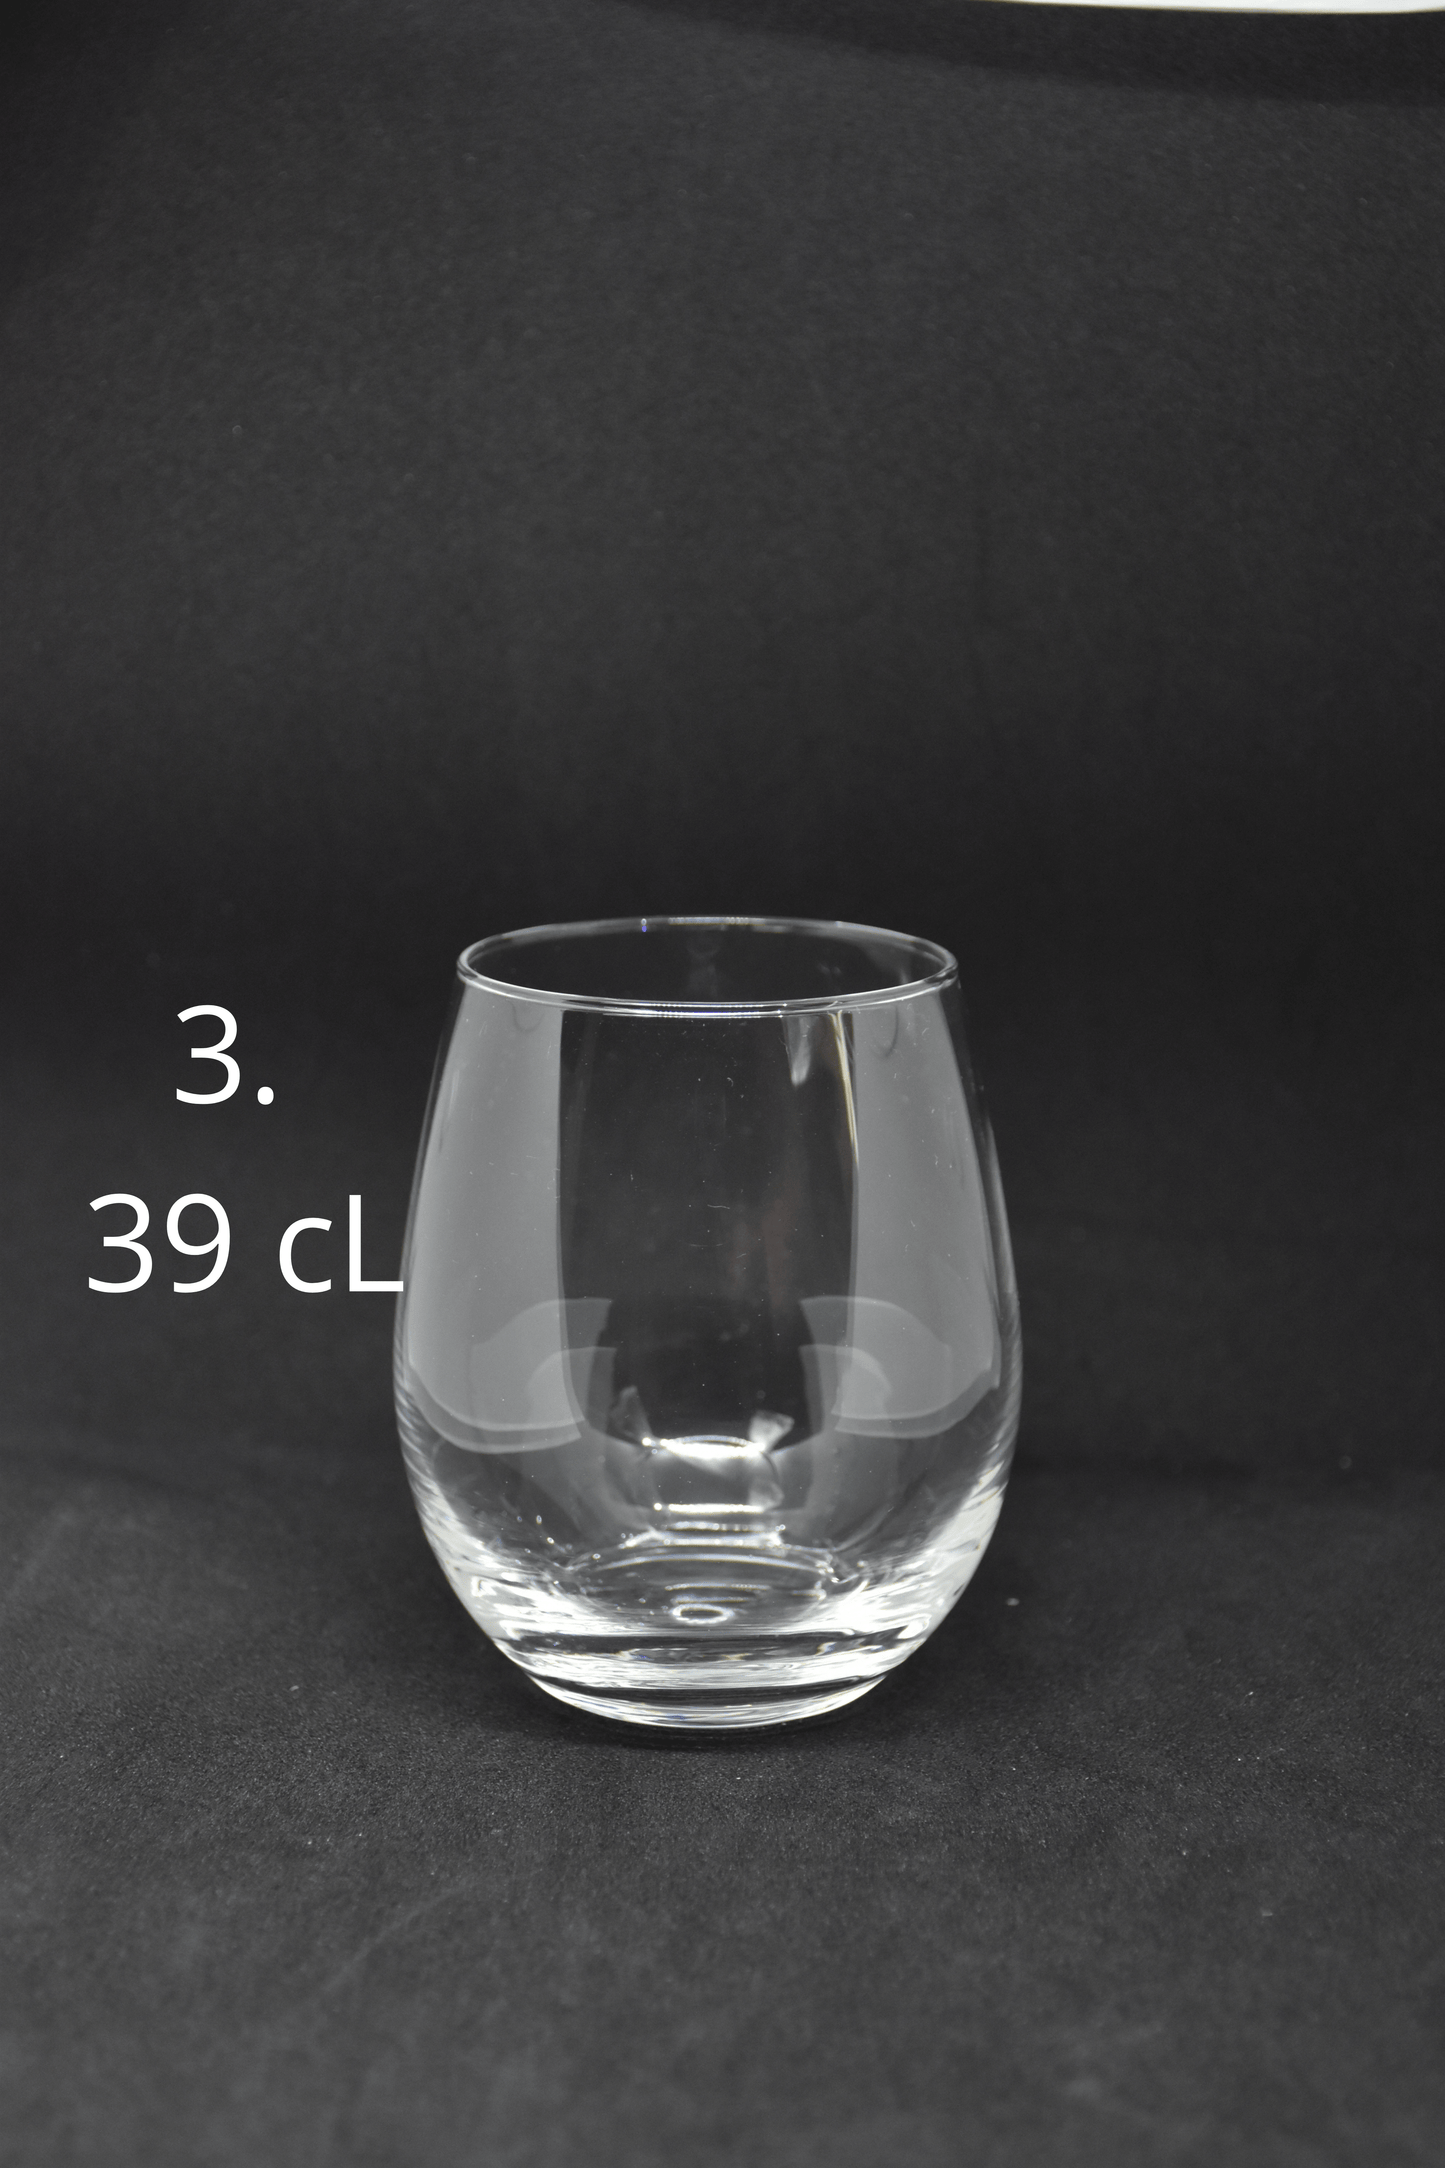 Monk - Dungeons & Dragons Classes Engraved Glasses